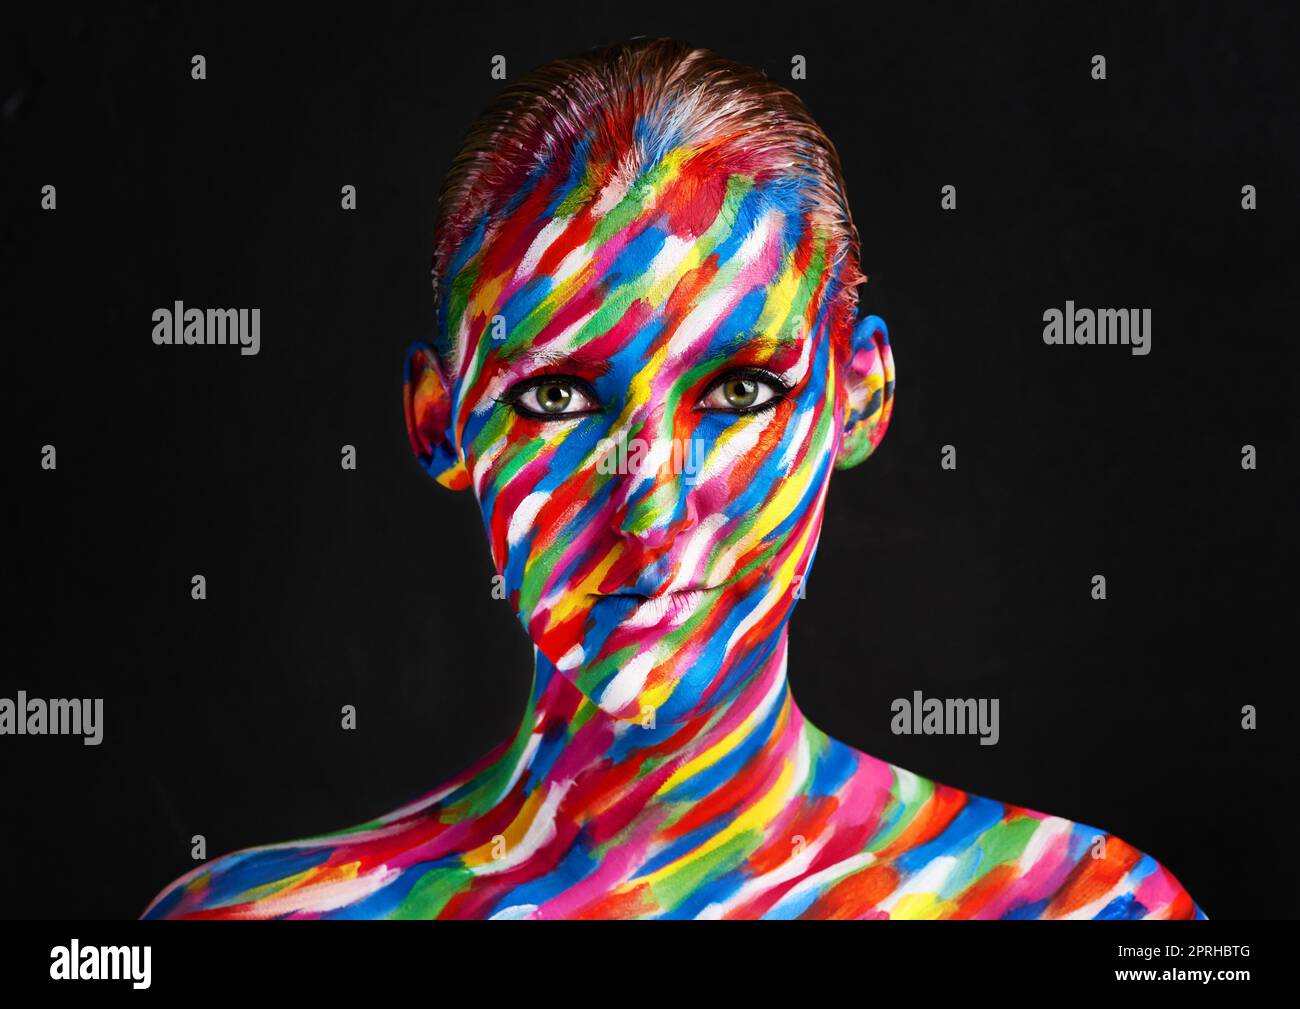 Be your own kind of beautiful. Studio shot of a young woman posing with brightly colored paint on her face against a black background. Stock Photo